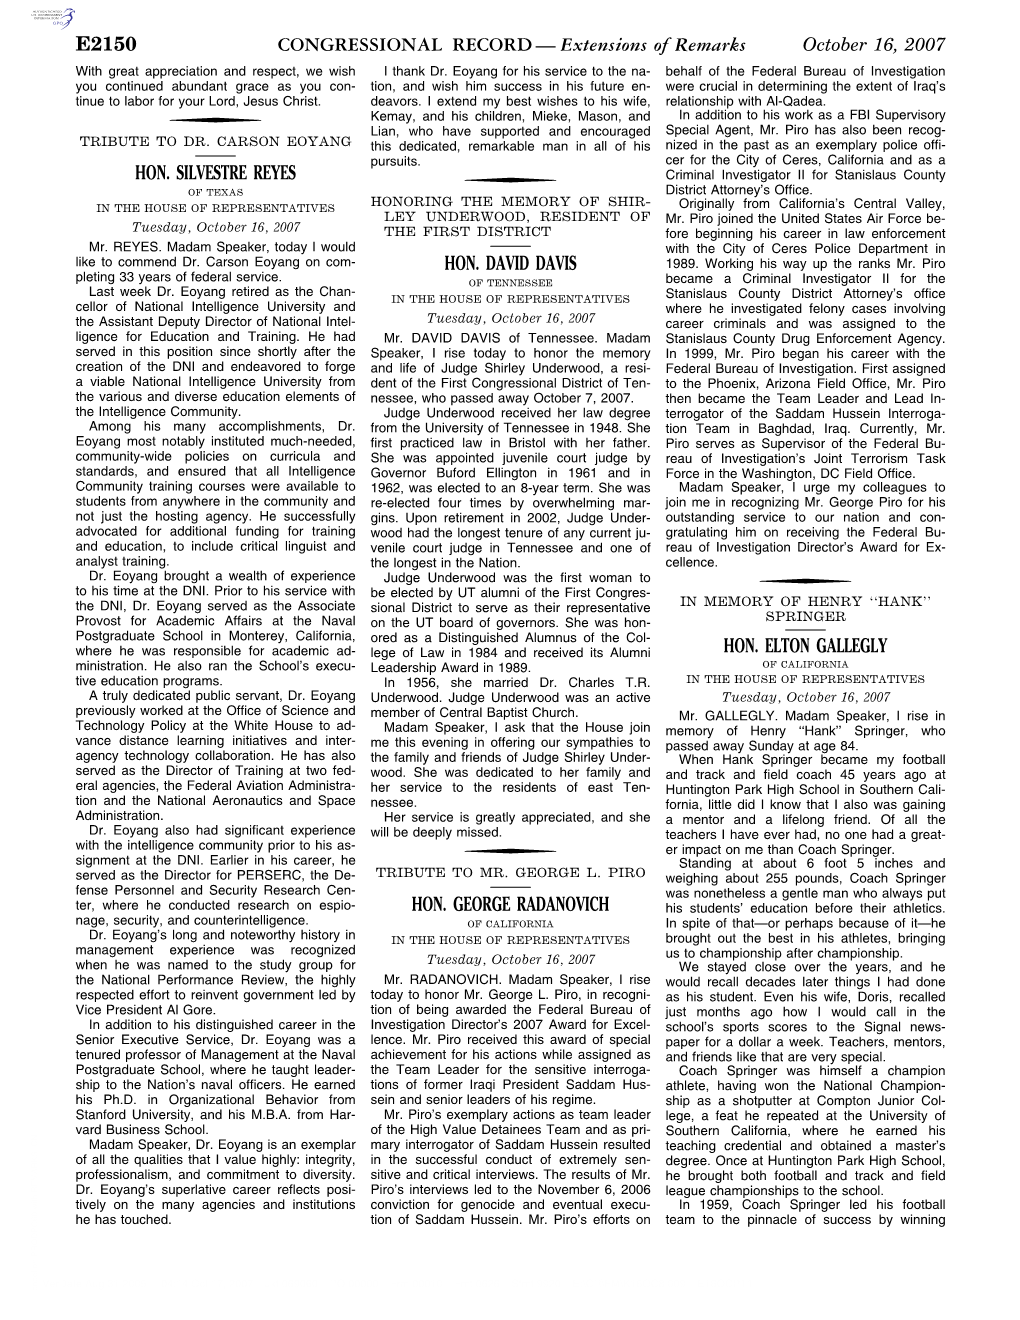 CONGRESSIONAL RECORD — Extensions of Remarks October 16, 2007 with Great Appreciation and Respect, We Wish I Thank Dr